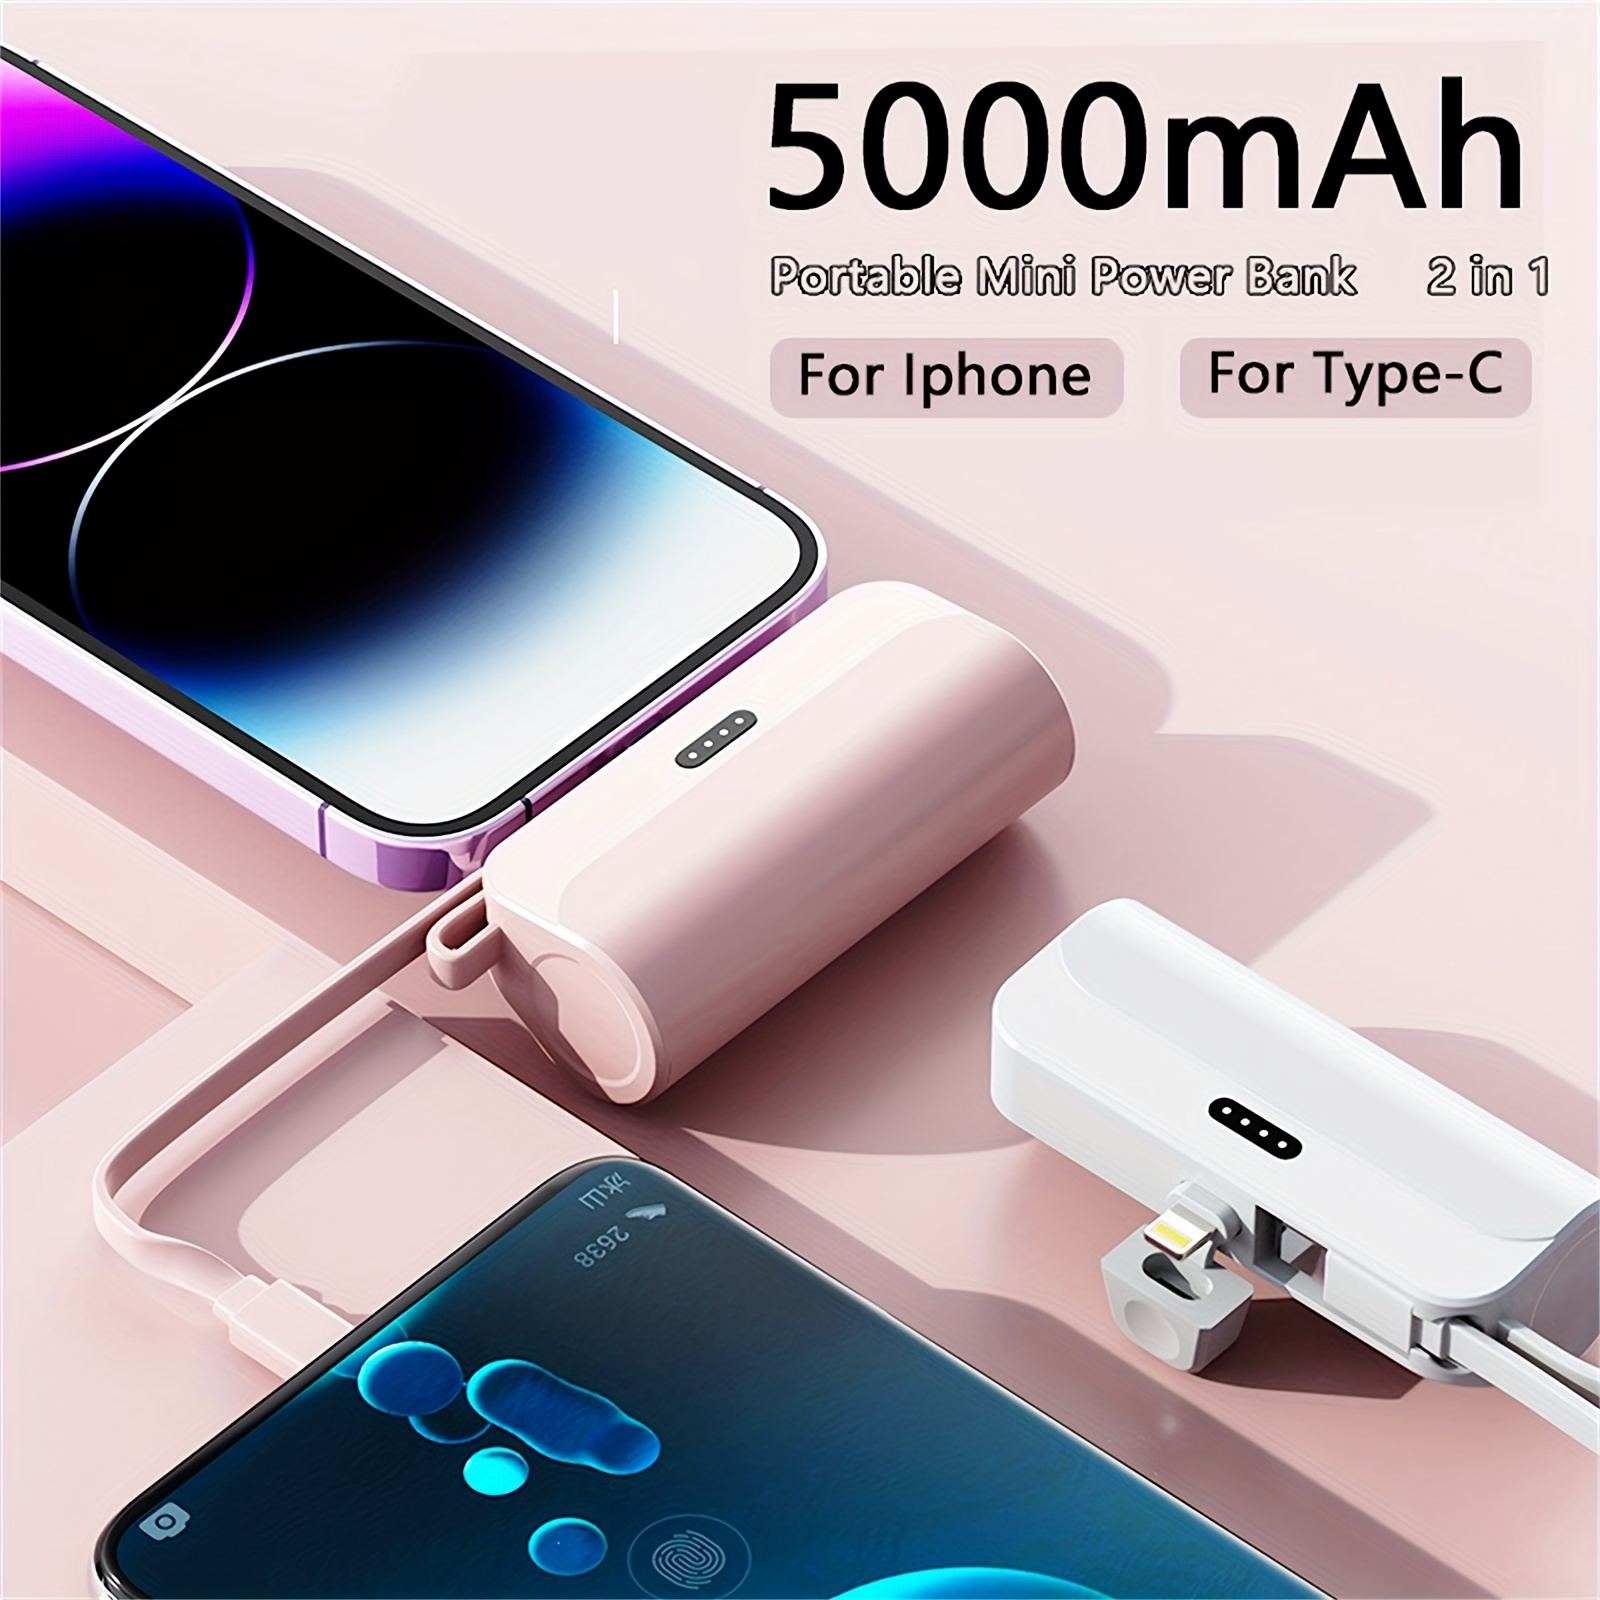 Mini Power Bank 3300mAh for Micro-USB - External Emergency Battery Charger